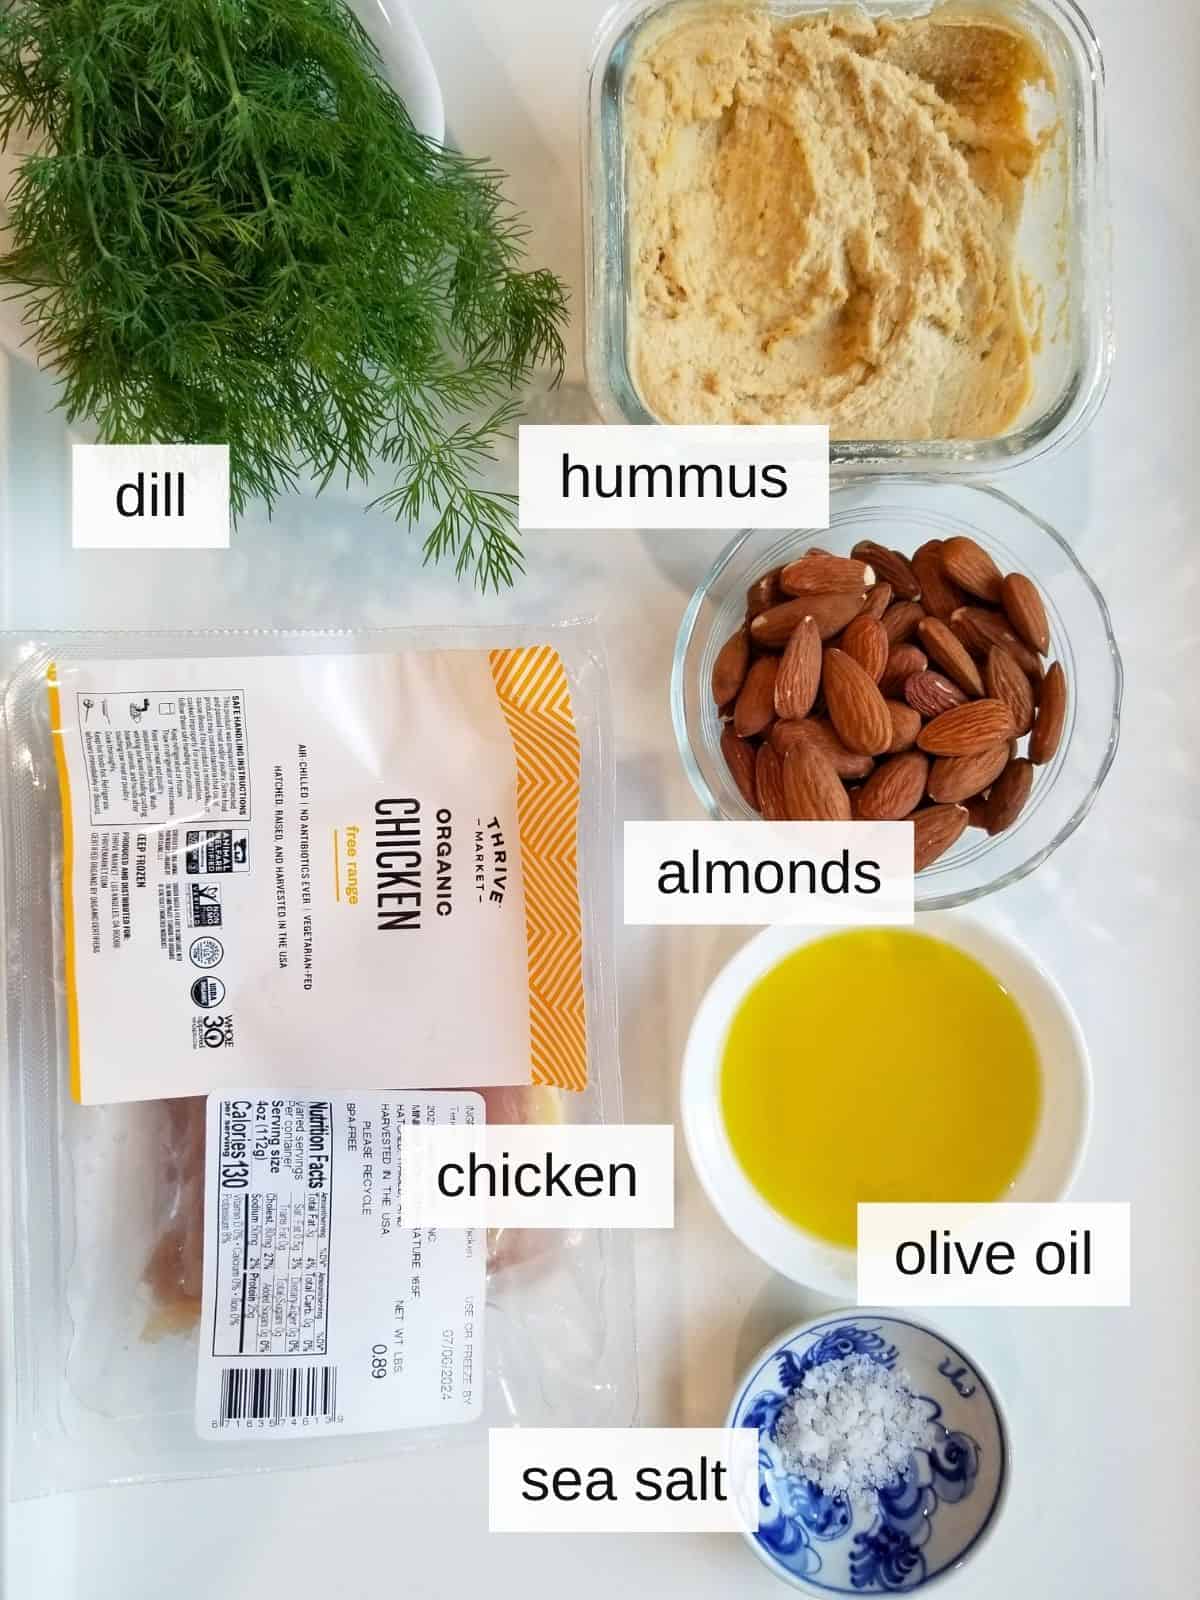 ingredients for baked hummus chicken, including hummus, almonds, fresh dill, chicken, olive oil, and sea salt.